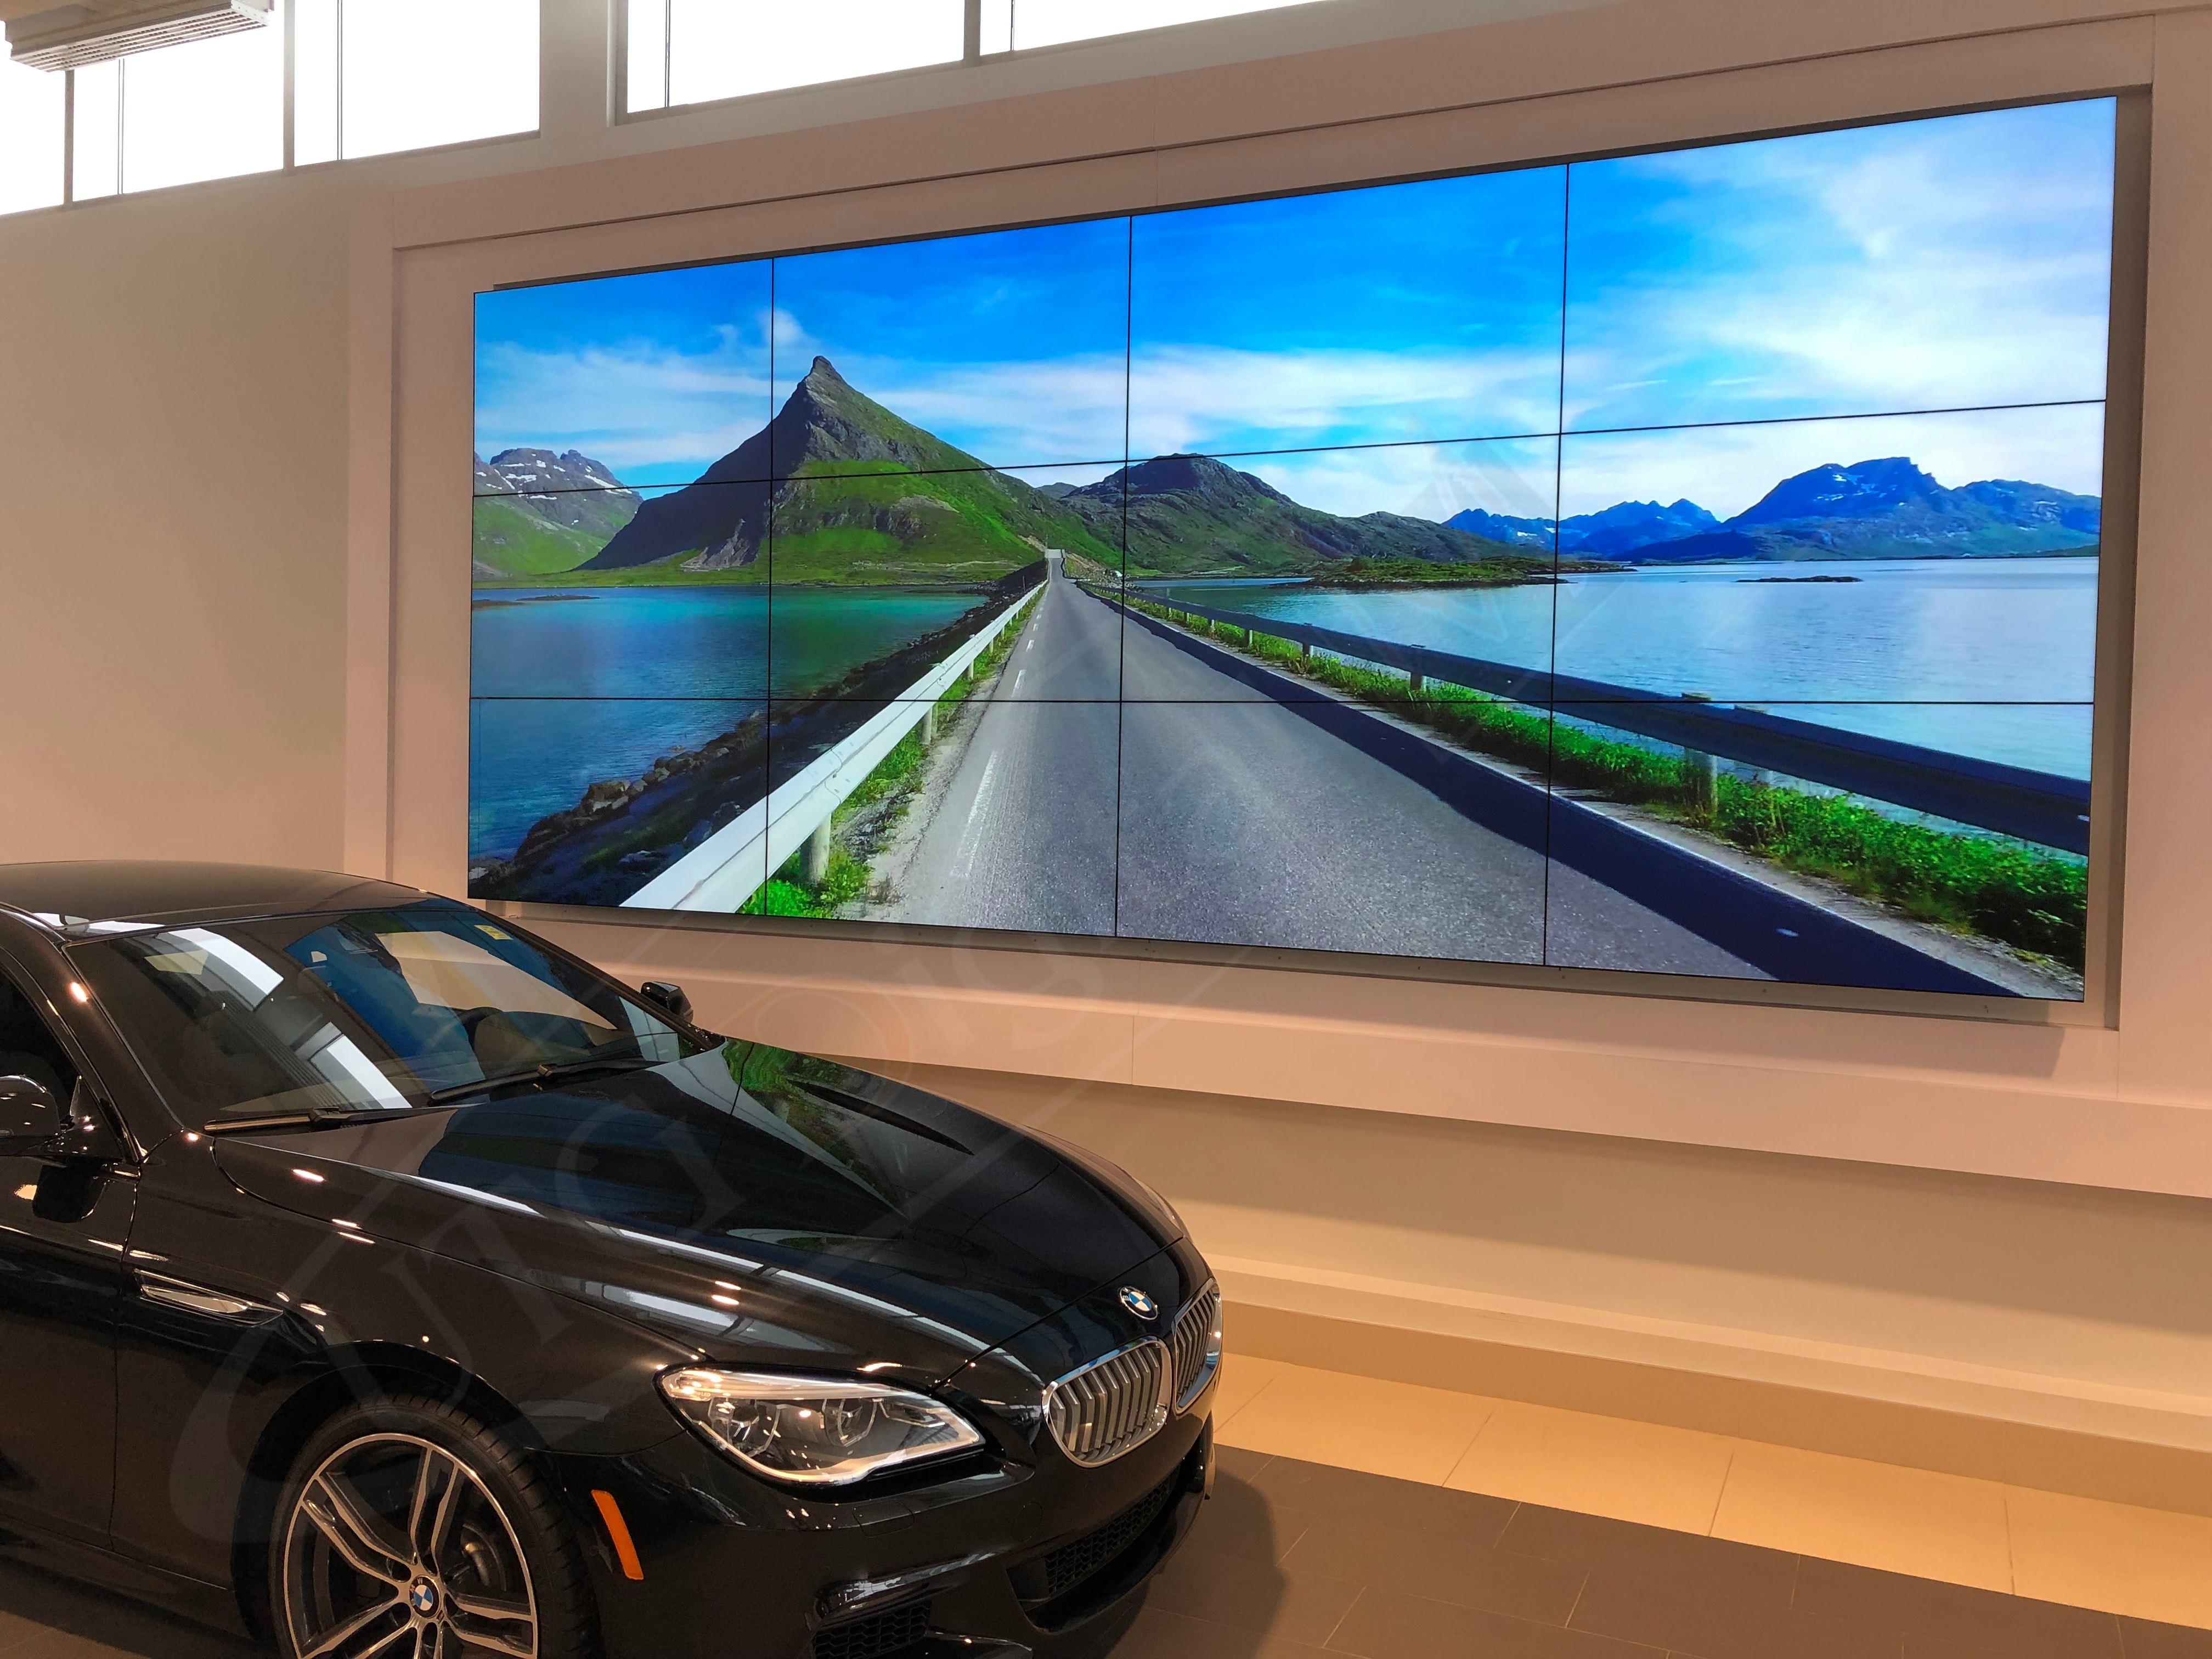 You are currently viewing UTG DELIVERS END-TO-END VIDEO WALL SOLUTION FOR OTTO’S BMW OTTAWA